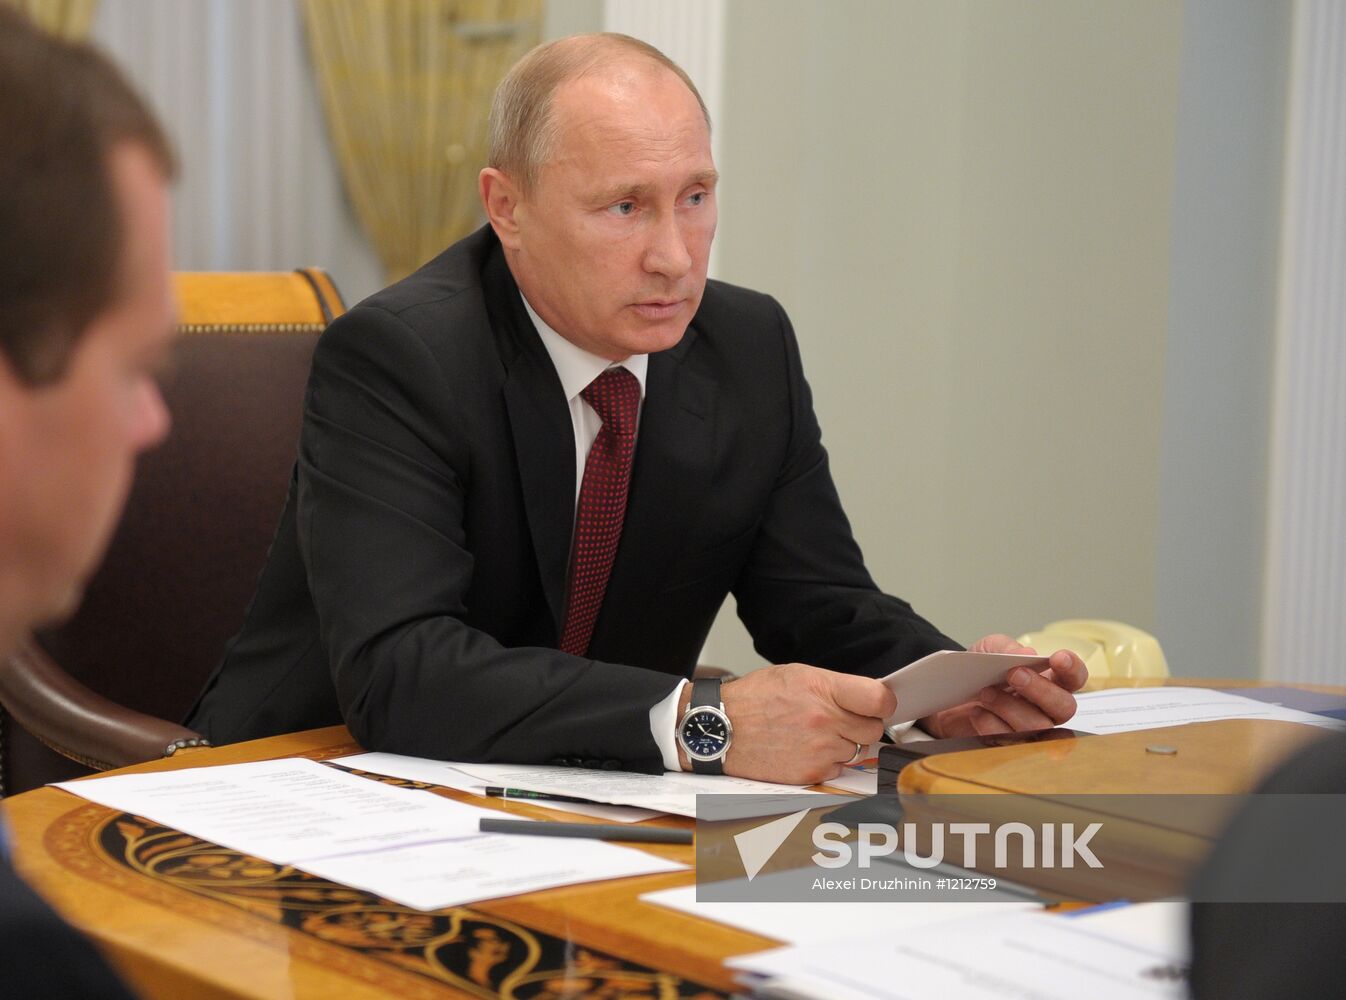 Putin chairs meeting on expansion of Moscow's city limits